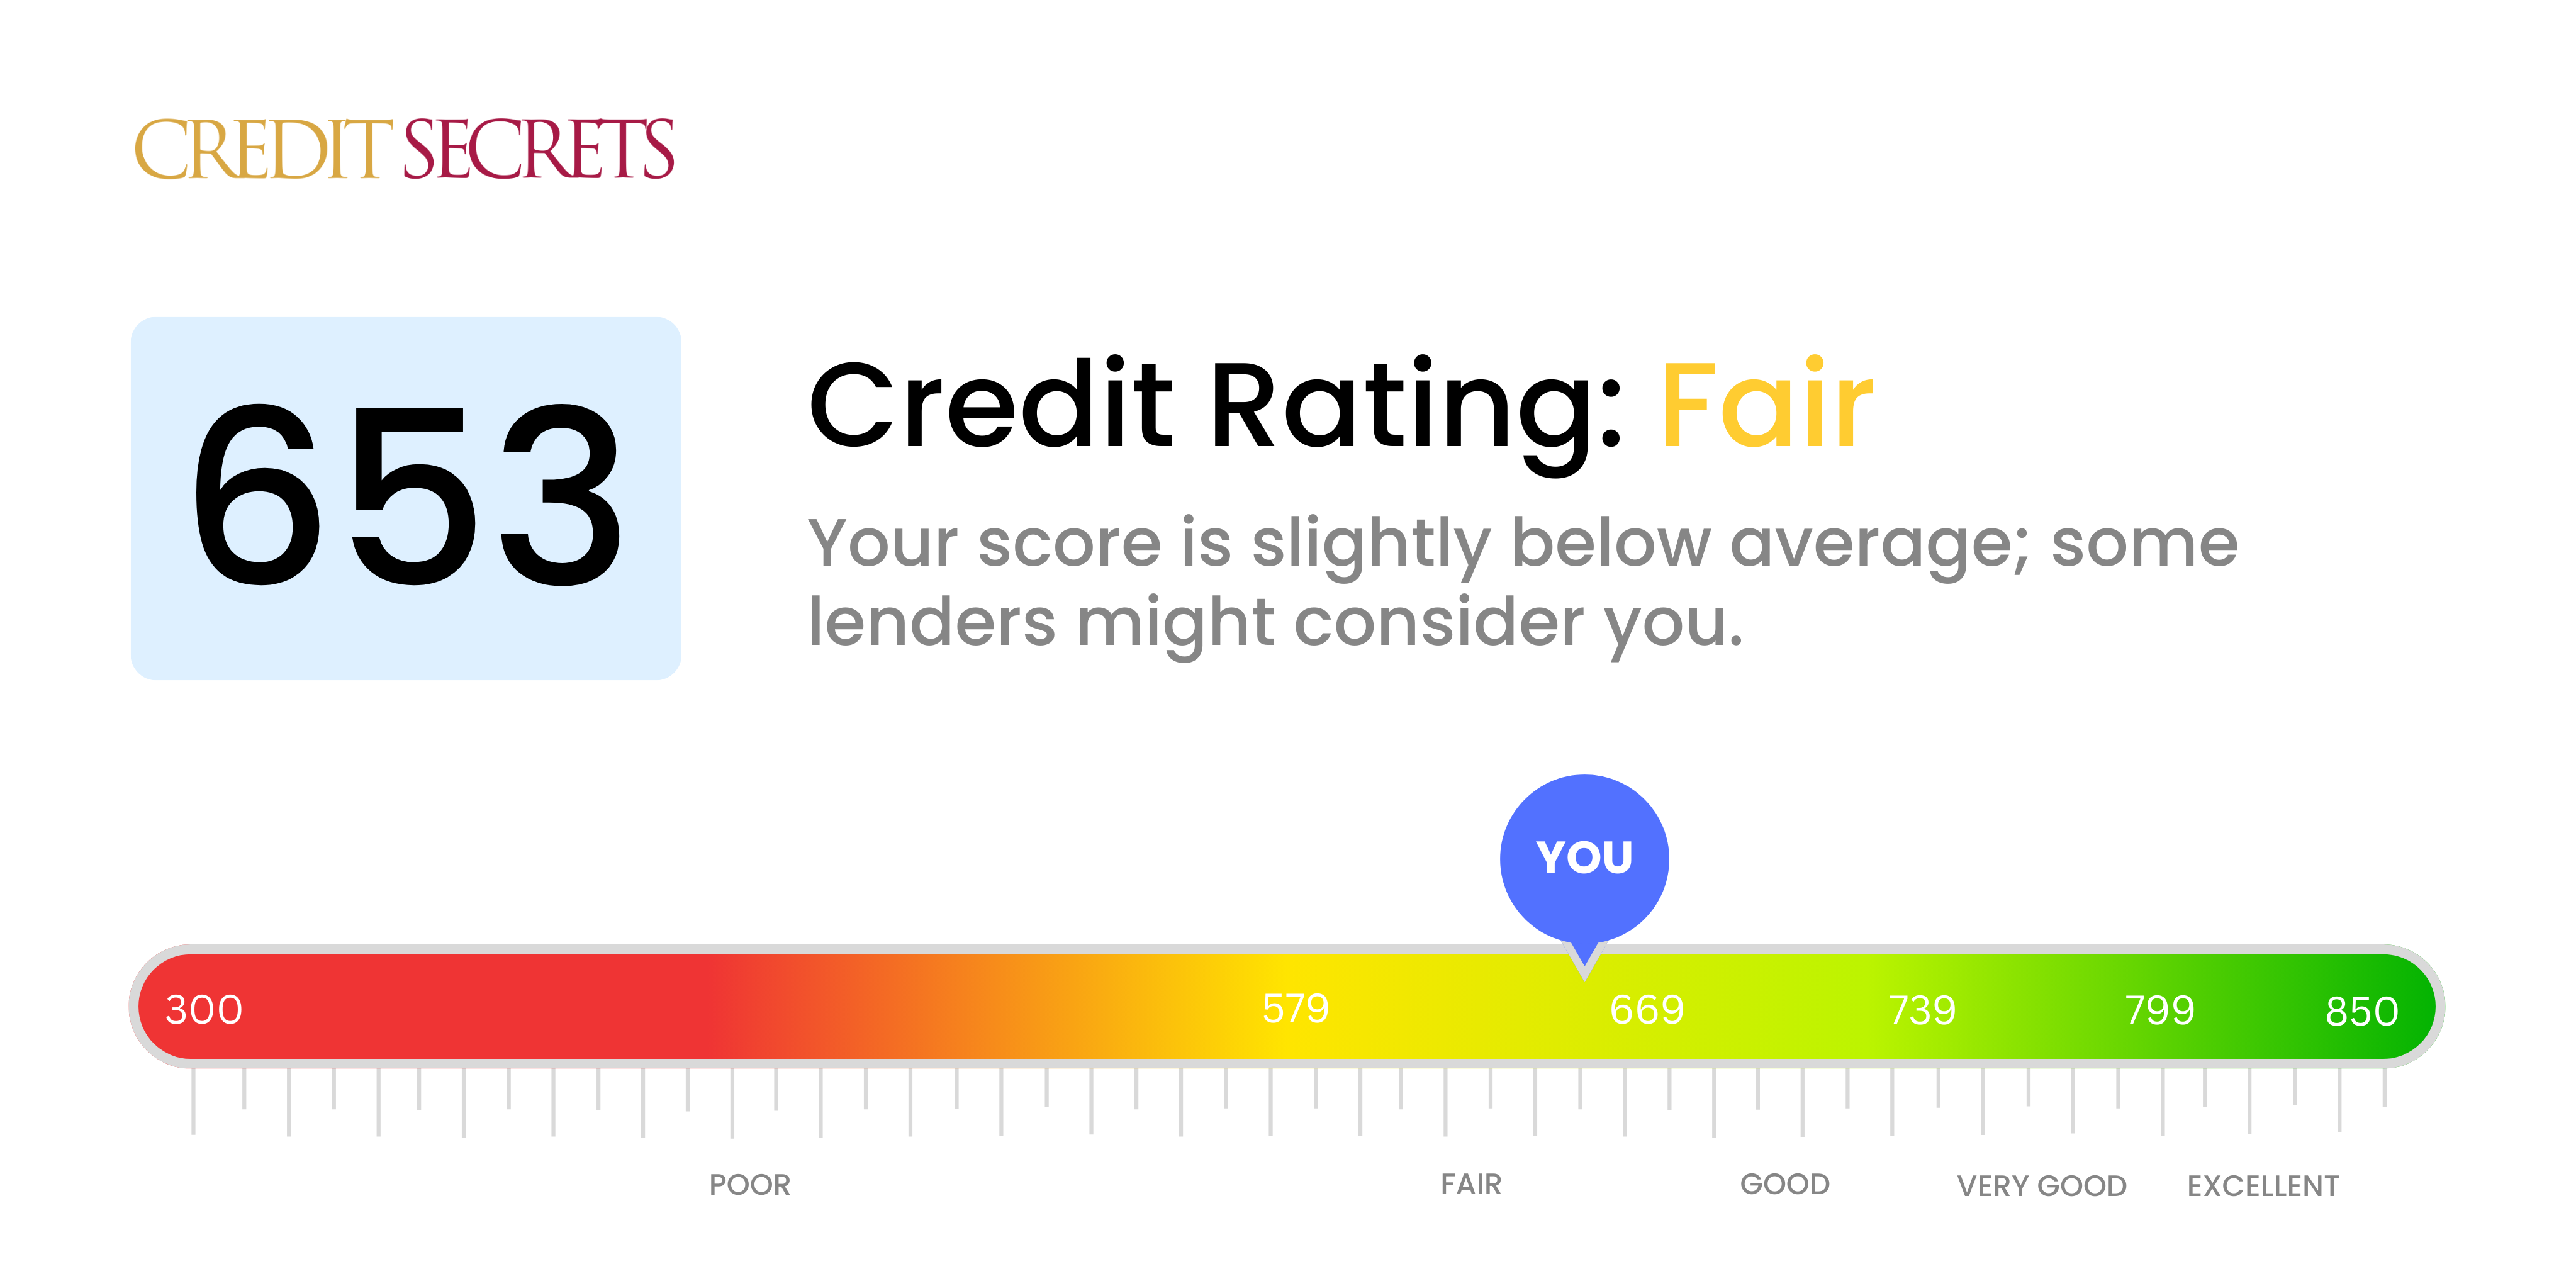 Is 653 a good credit score?